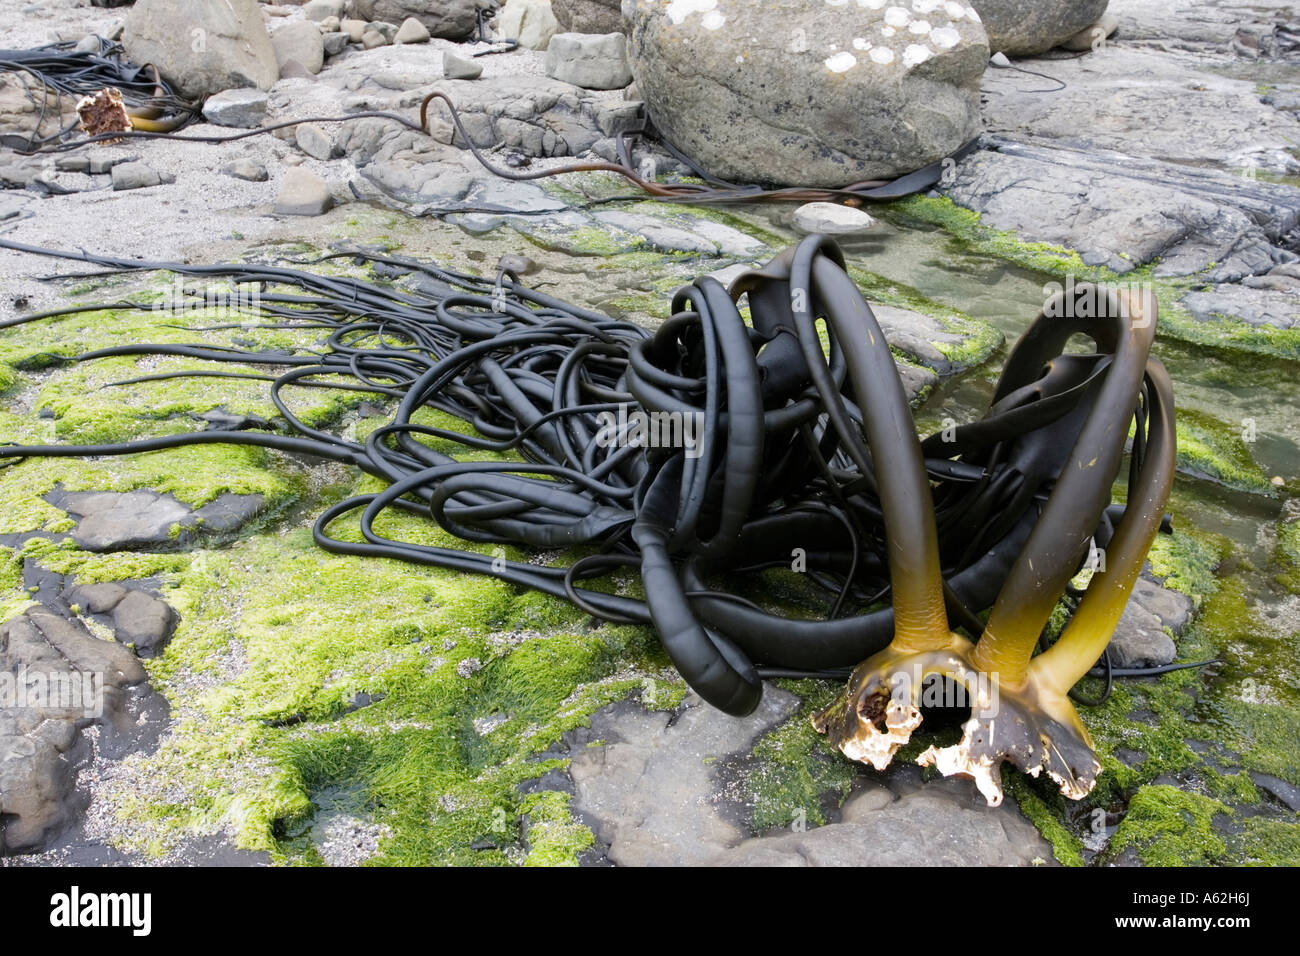 Holdfast or stipe of large kelp washed up on beach Curio Bay the Catlins New Zealand Stock Photo